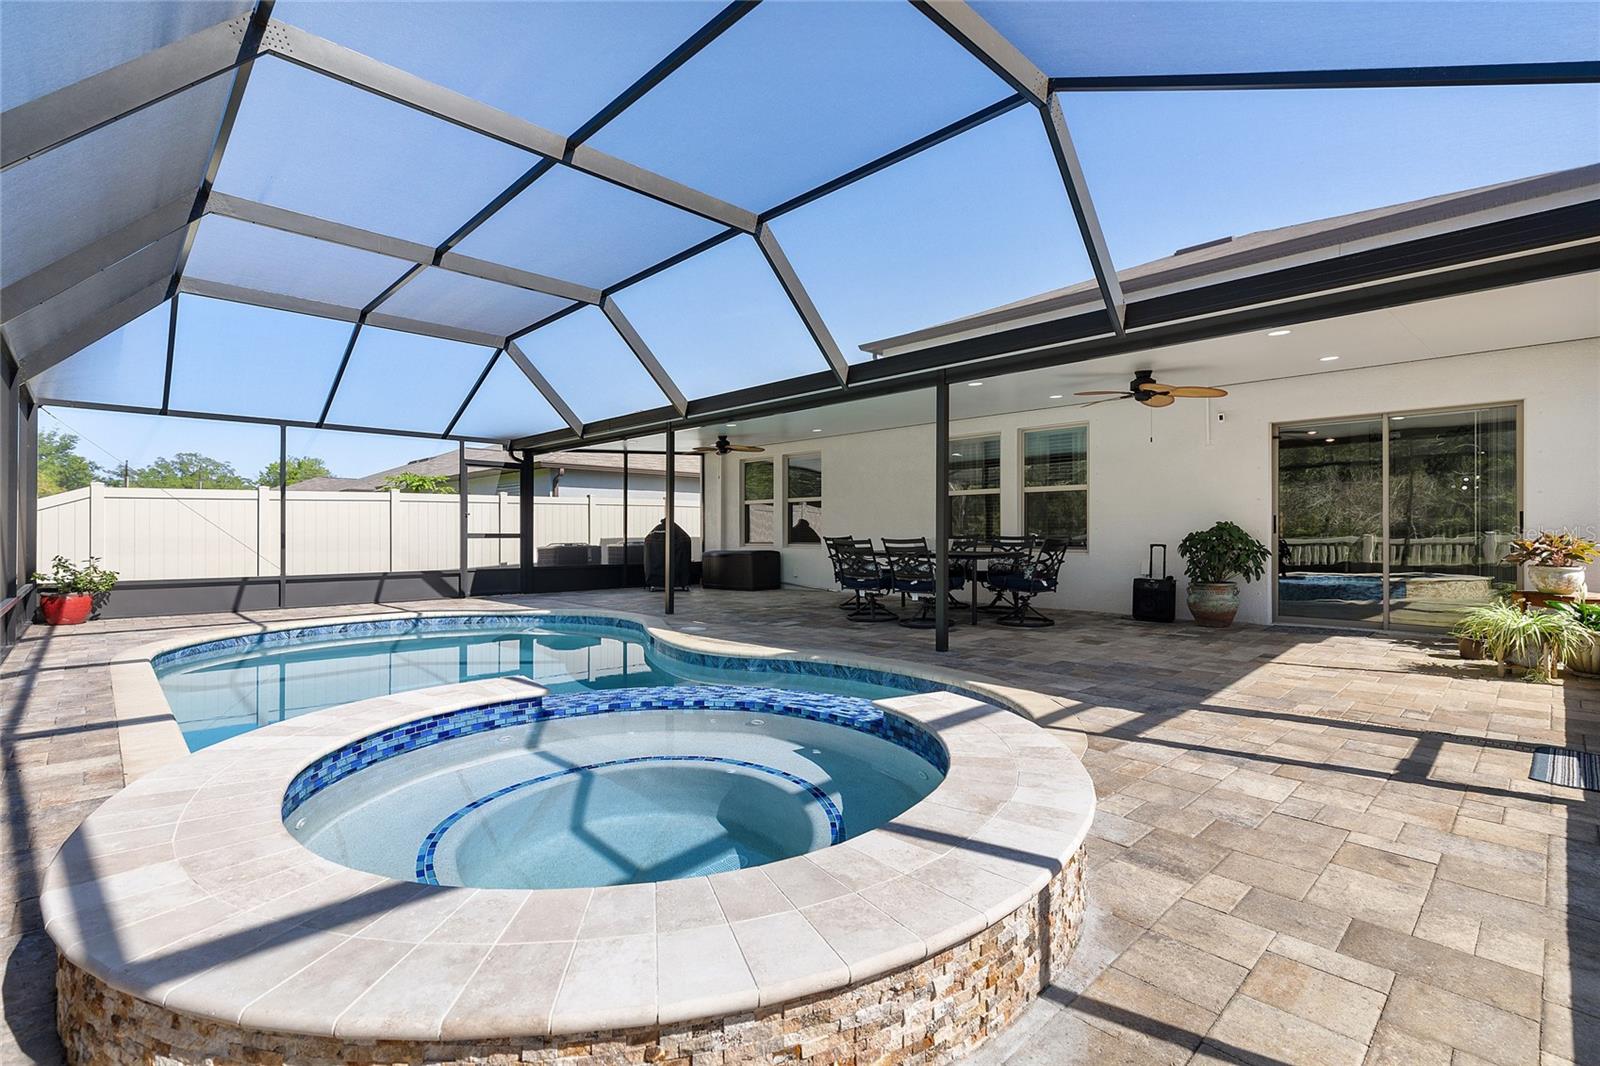 Beautiful covered patio and caged pool area